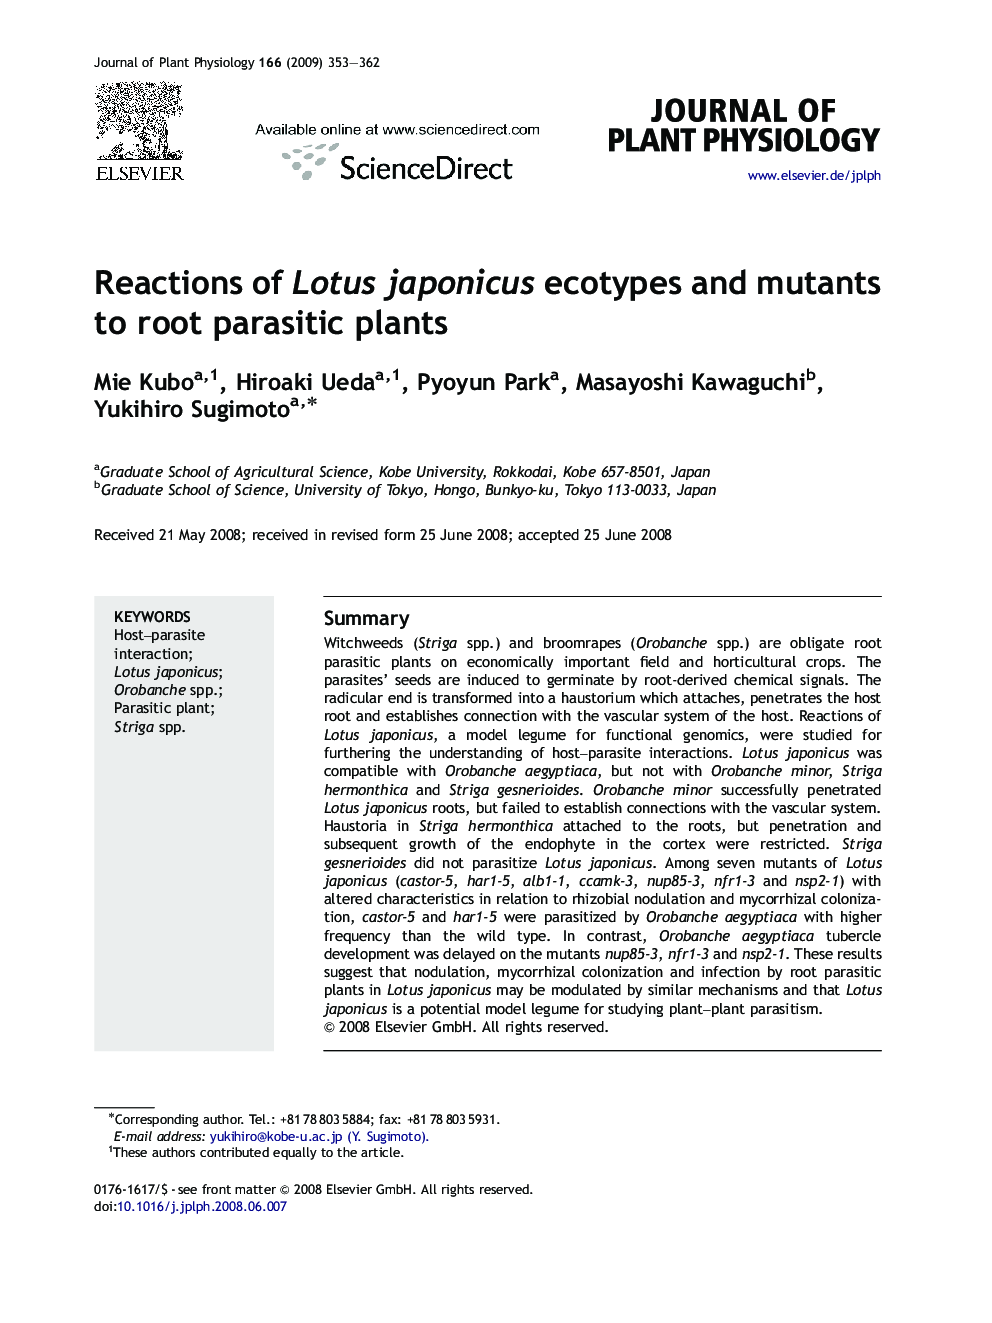 Reactions of Lotus japonicus ecotypes and mutants to root parasitic plants